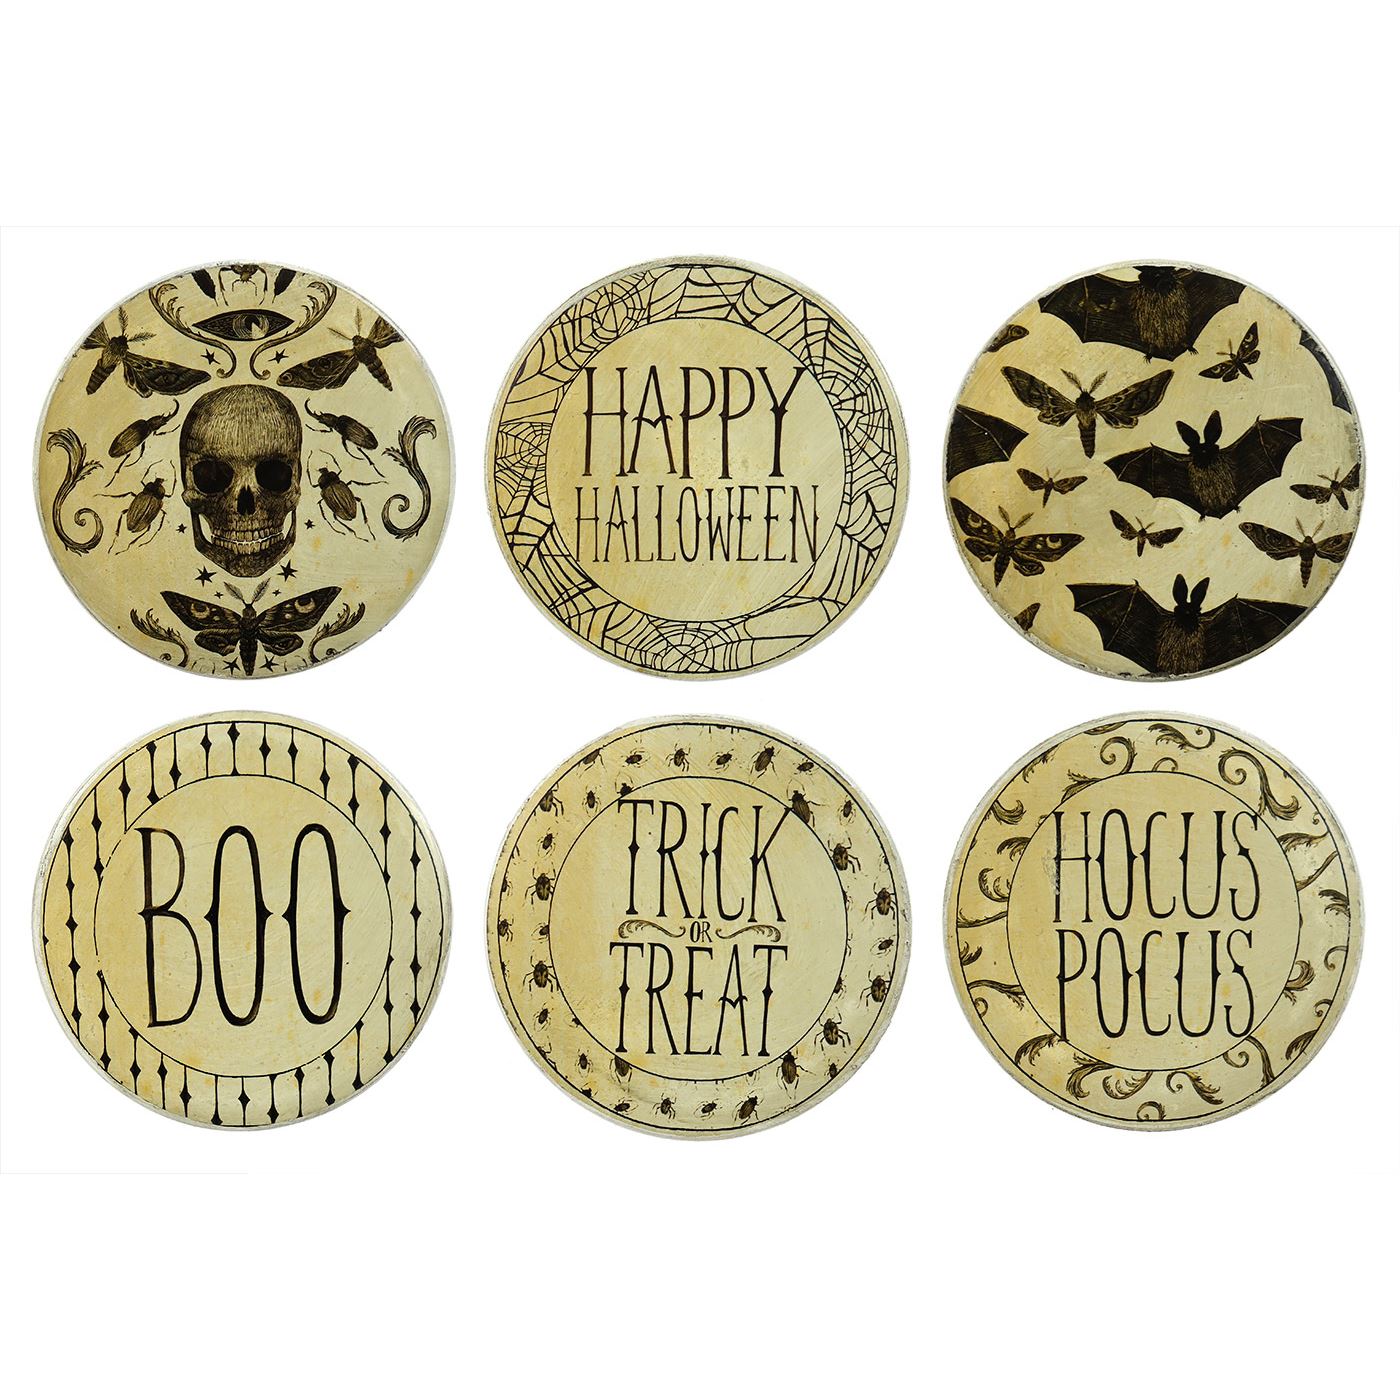 Halloween Images and Words Coasters Set/6